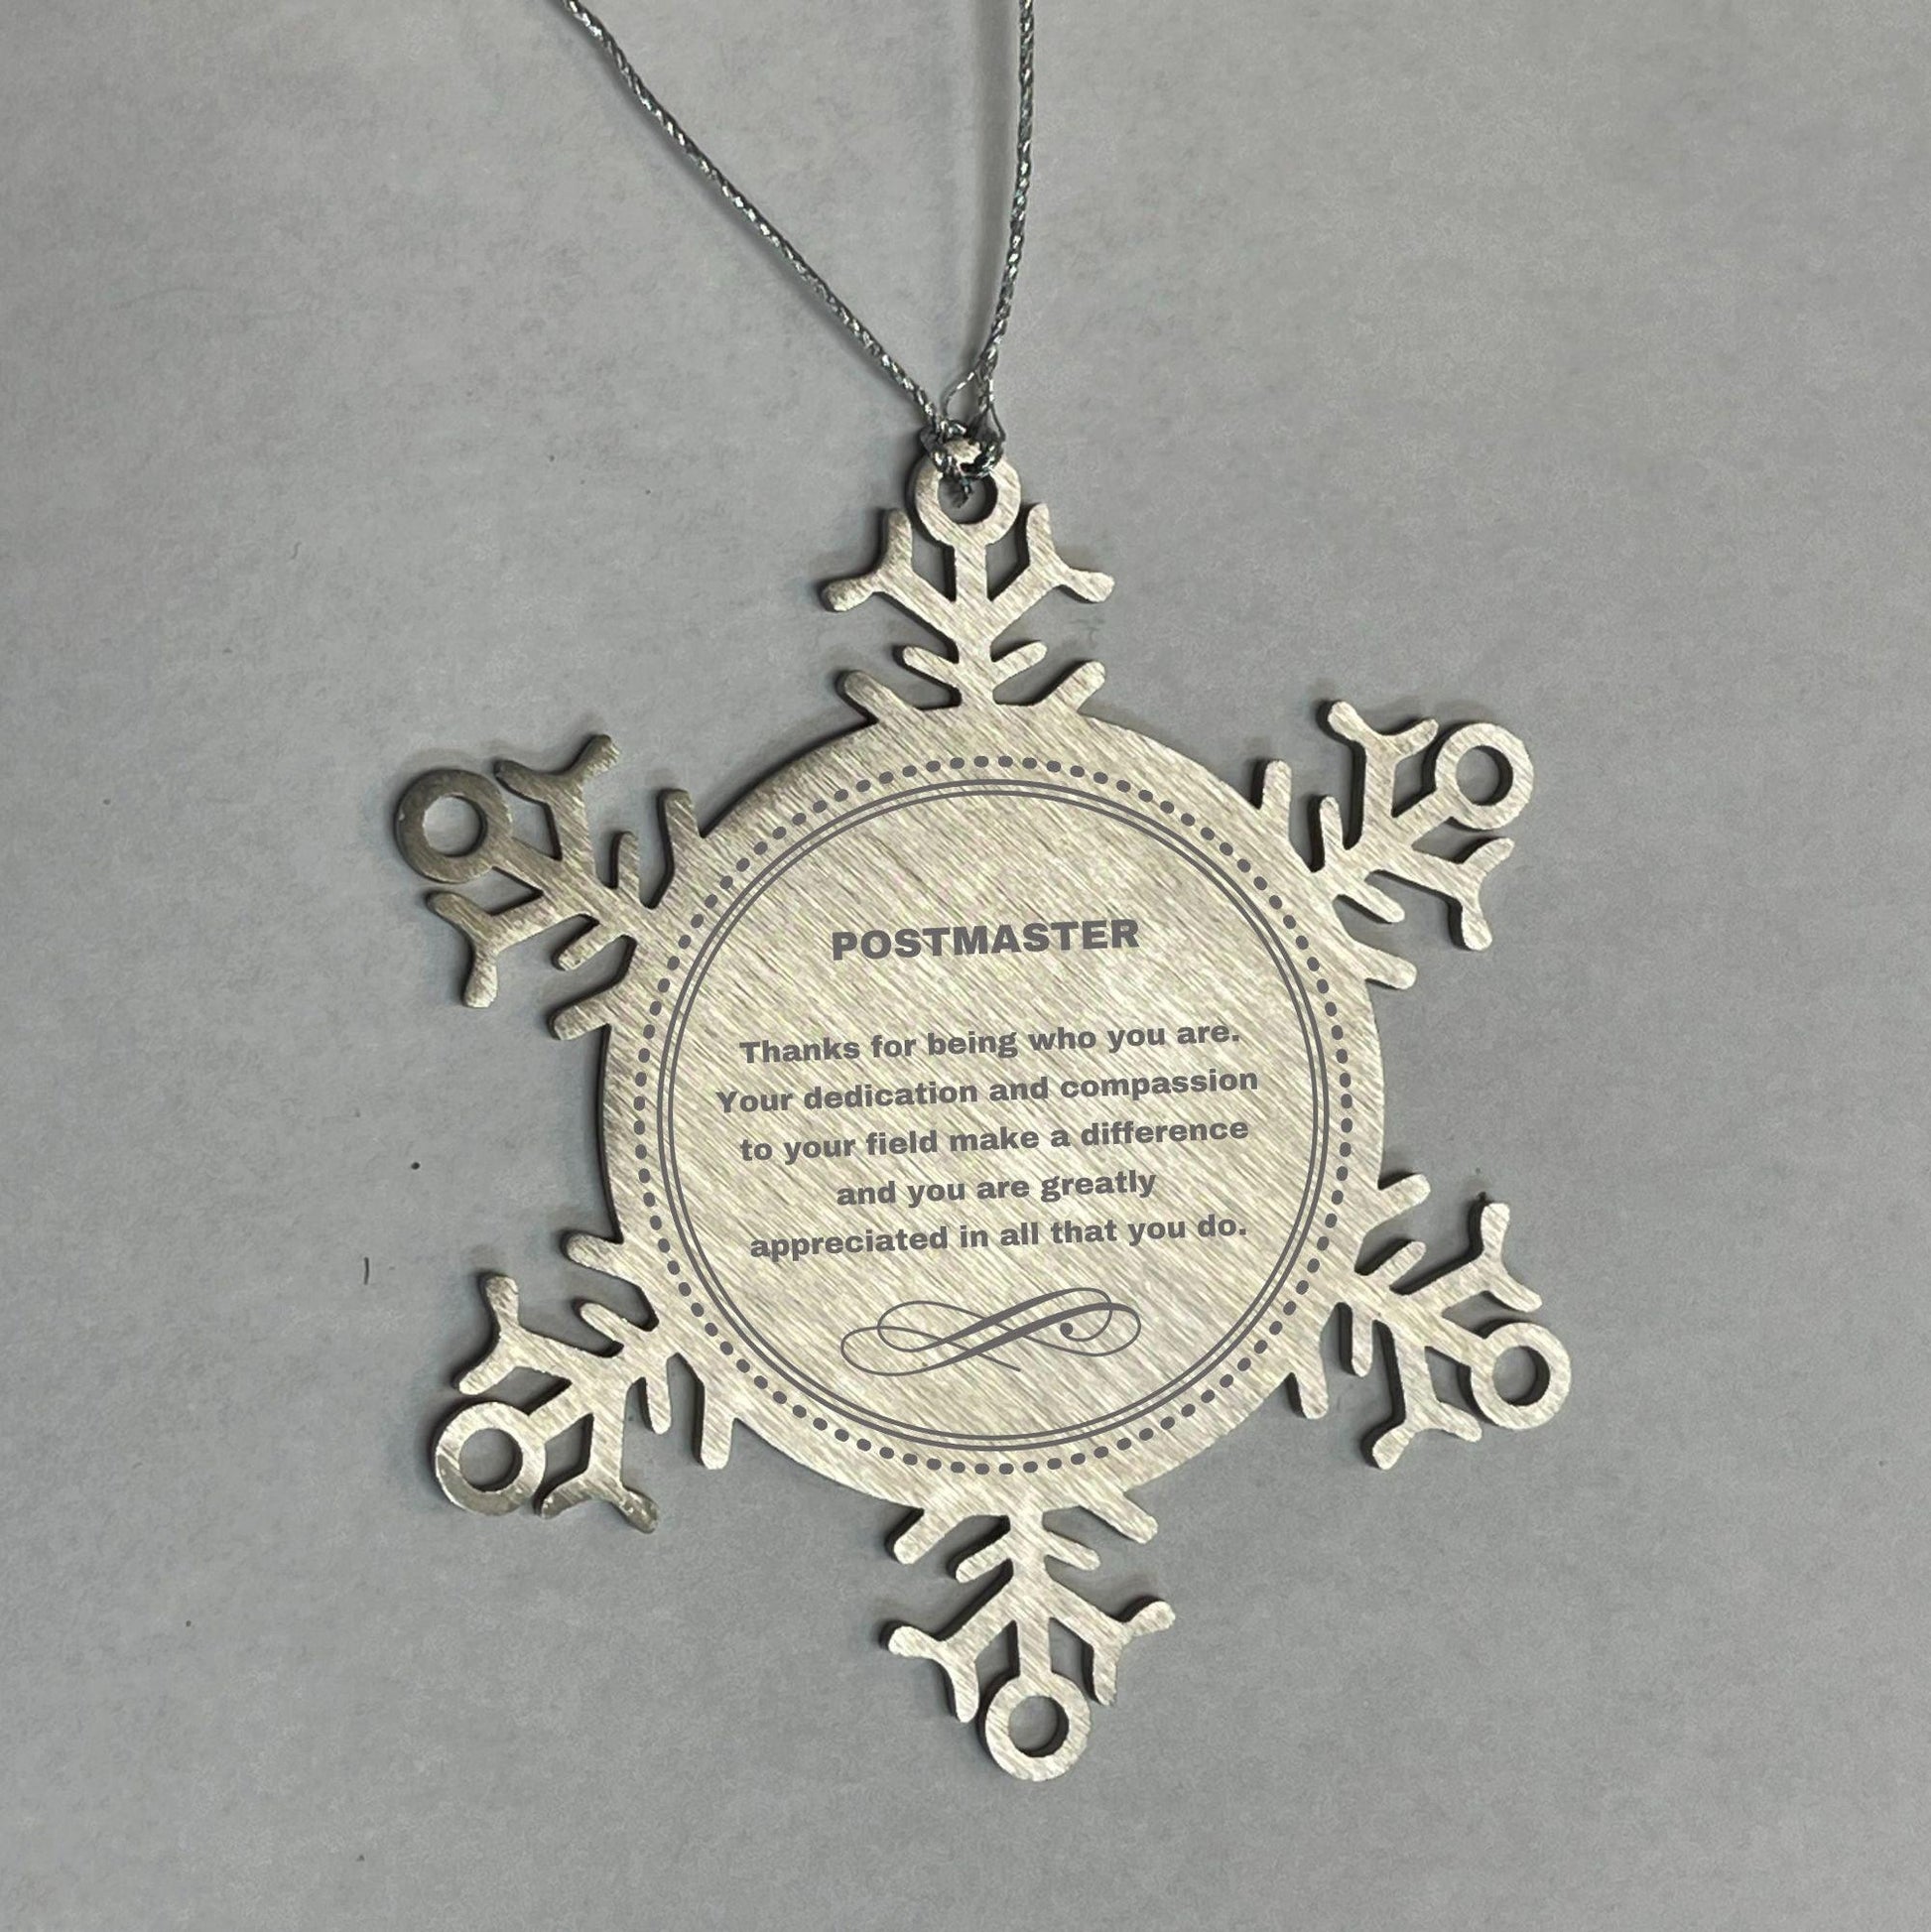 Postmaster Snowflake Ornament - Thanks for being who you are - Birthday Christmas Jewelry Gifts Coworkers Colleague Boss - Mallard Moon Gift Shop